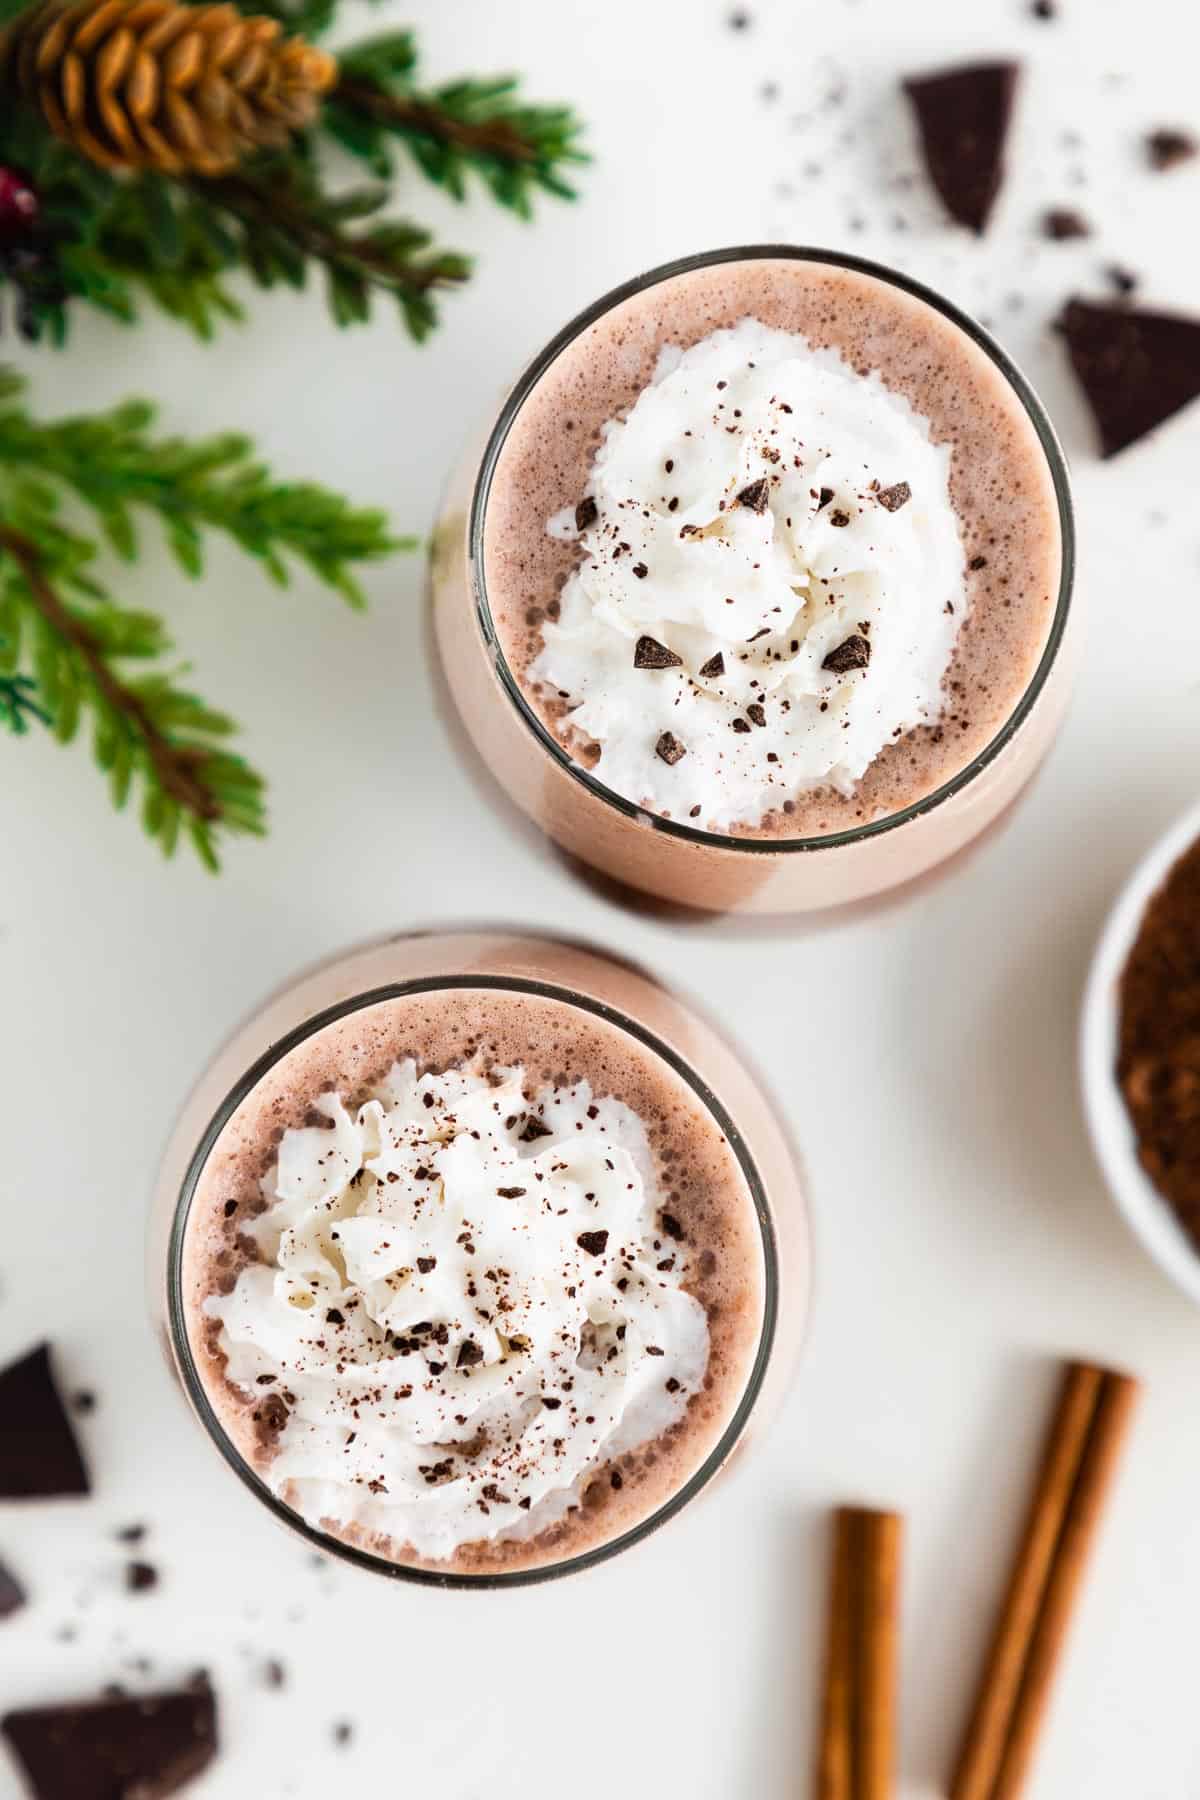 vegan hot chocolate in two glasses with whipped cream on top, surrounded by pieces of dark chocolate, cinnamon sticks, and a bowl of cocoa powder